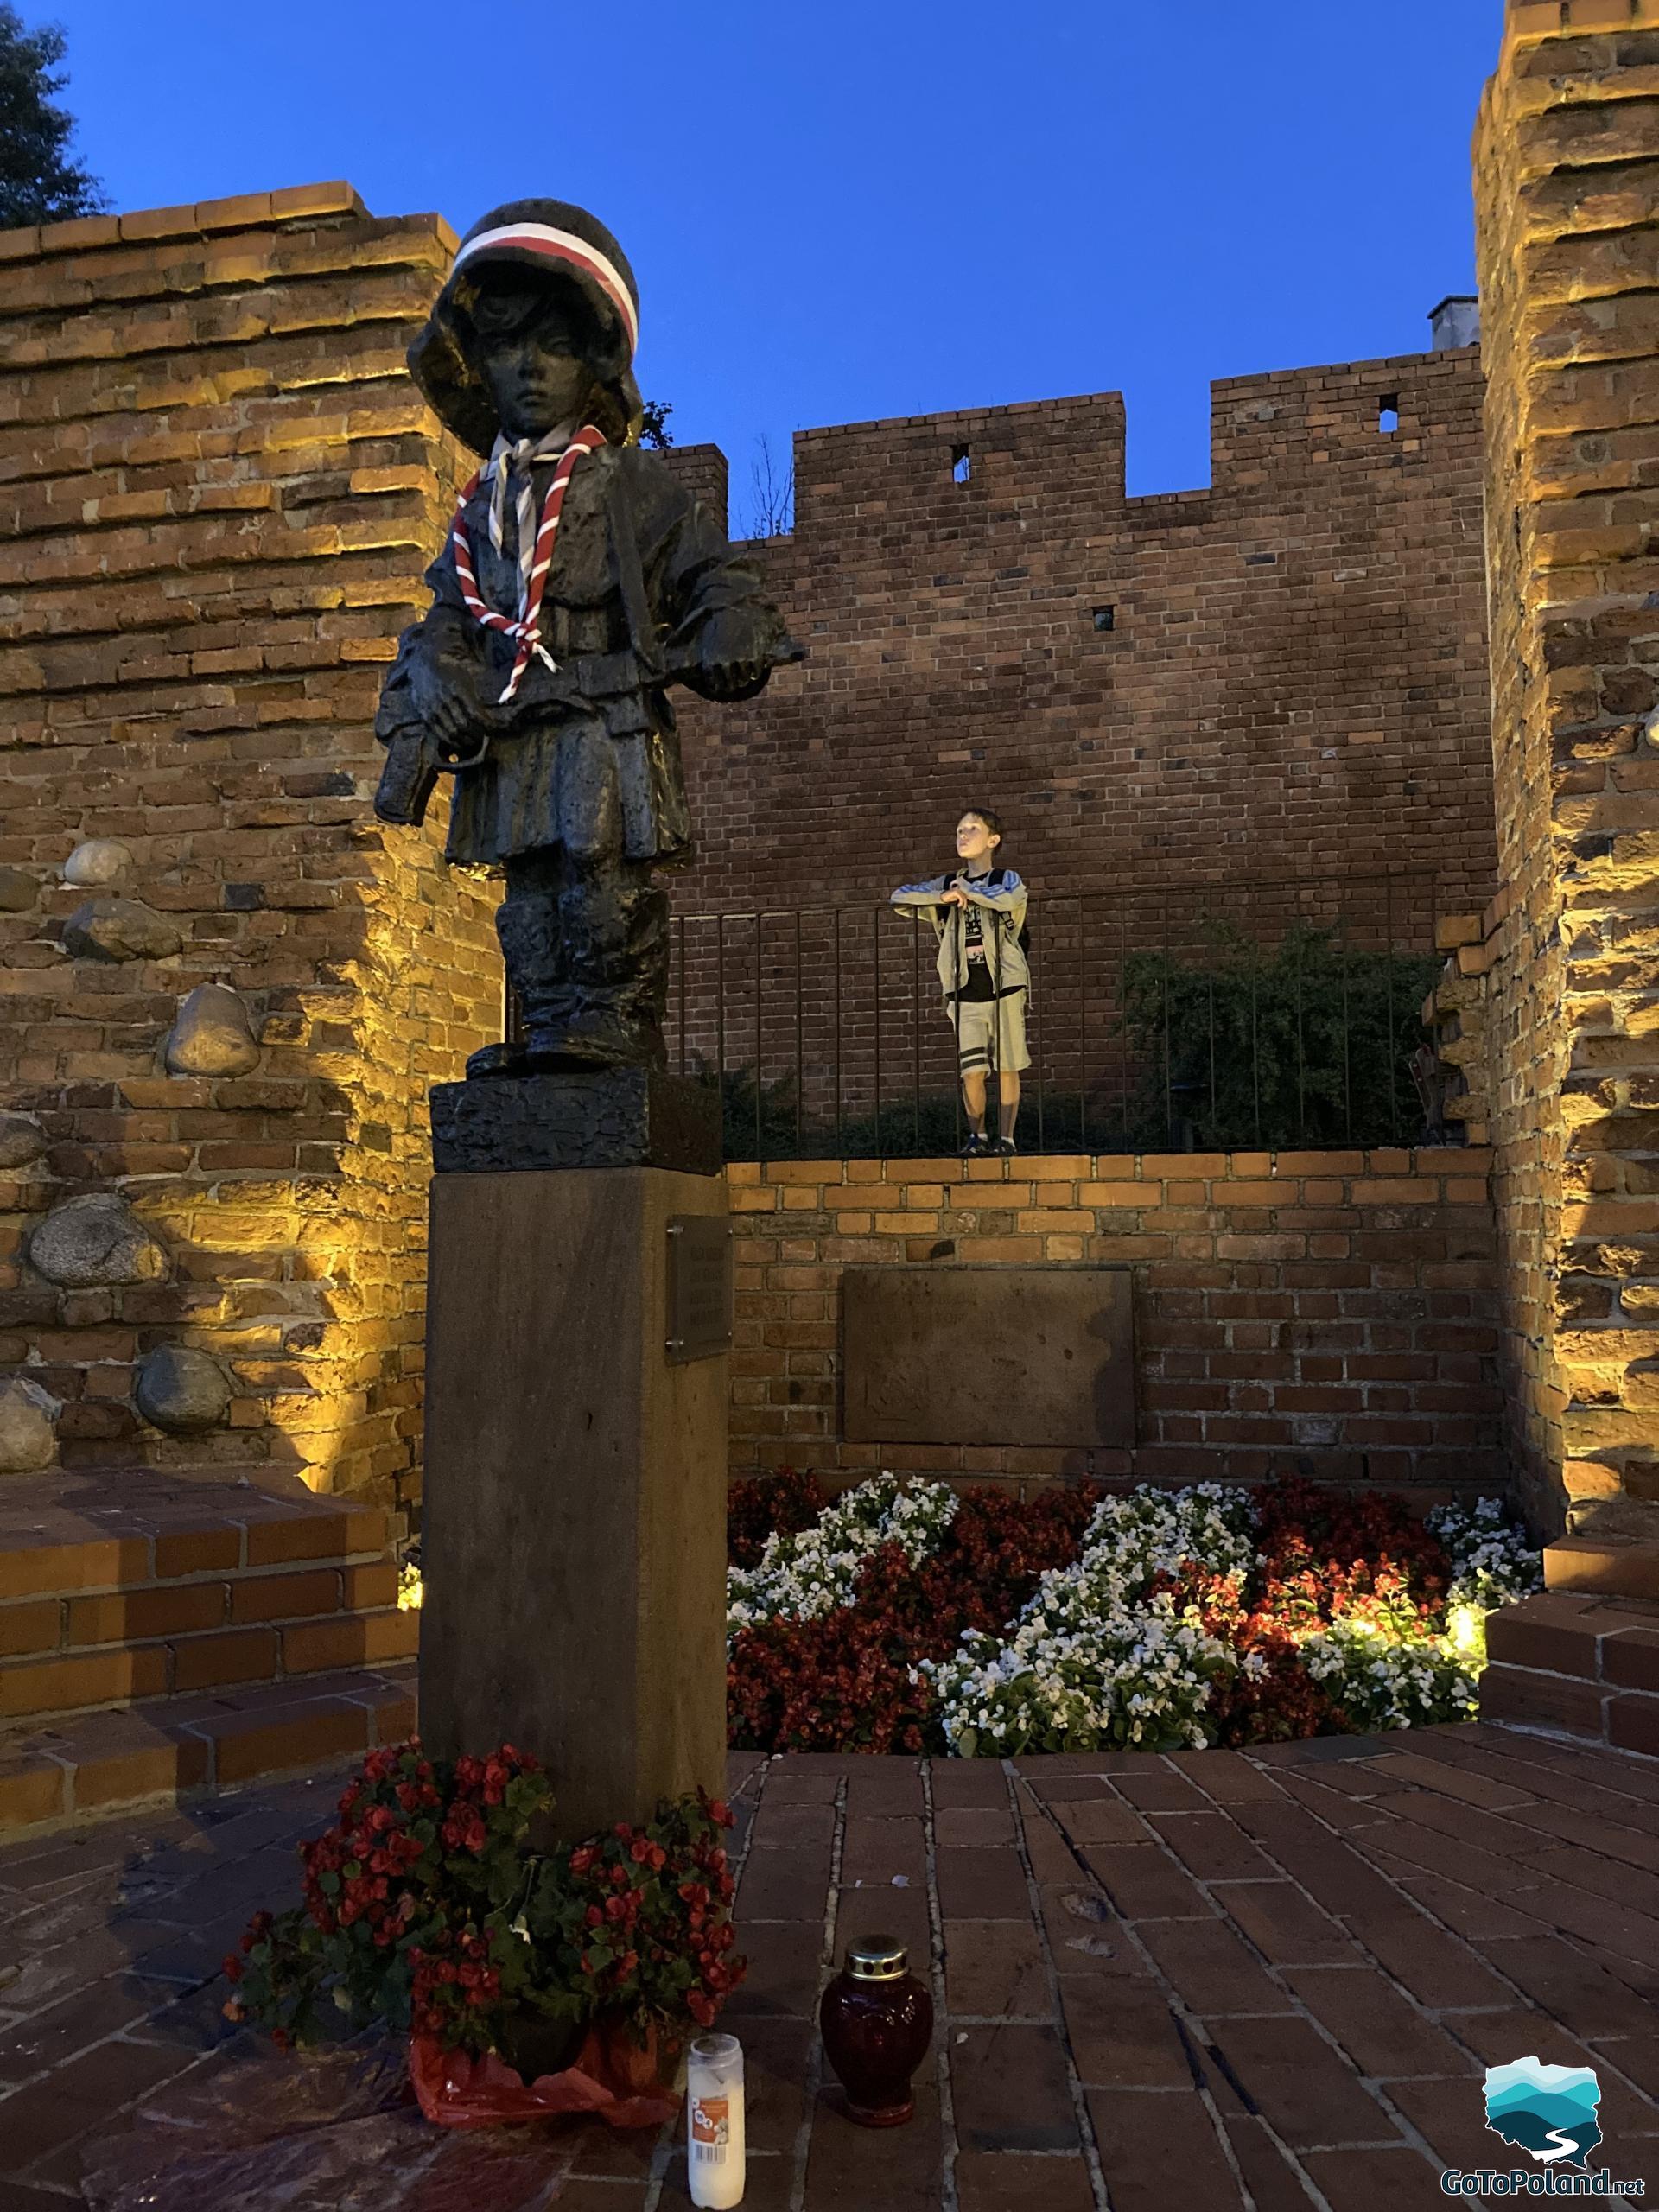 a statue of a little boy in a helmet, a little insurgent, red flowers under the statue